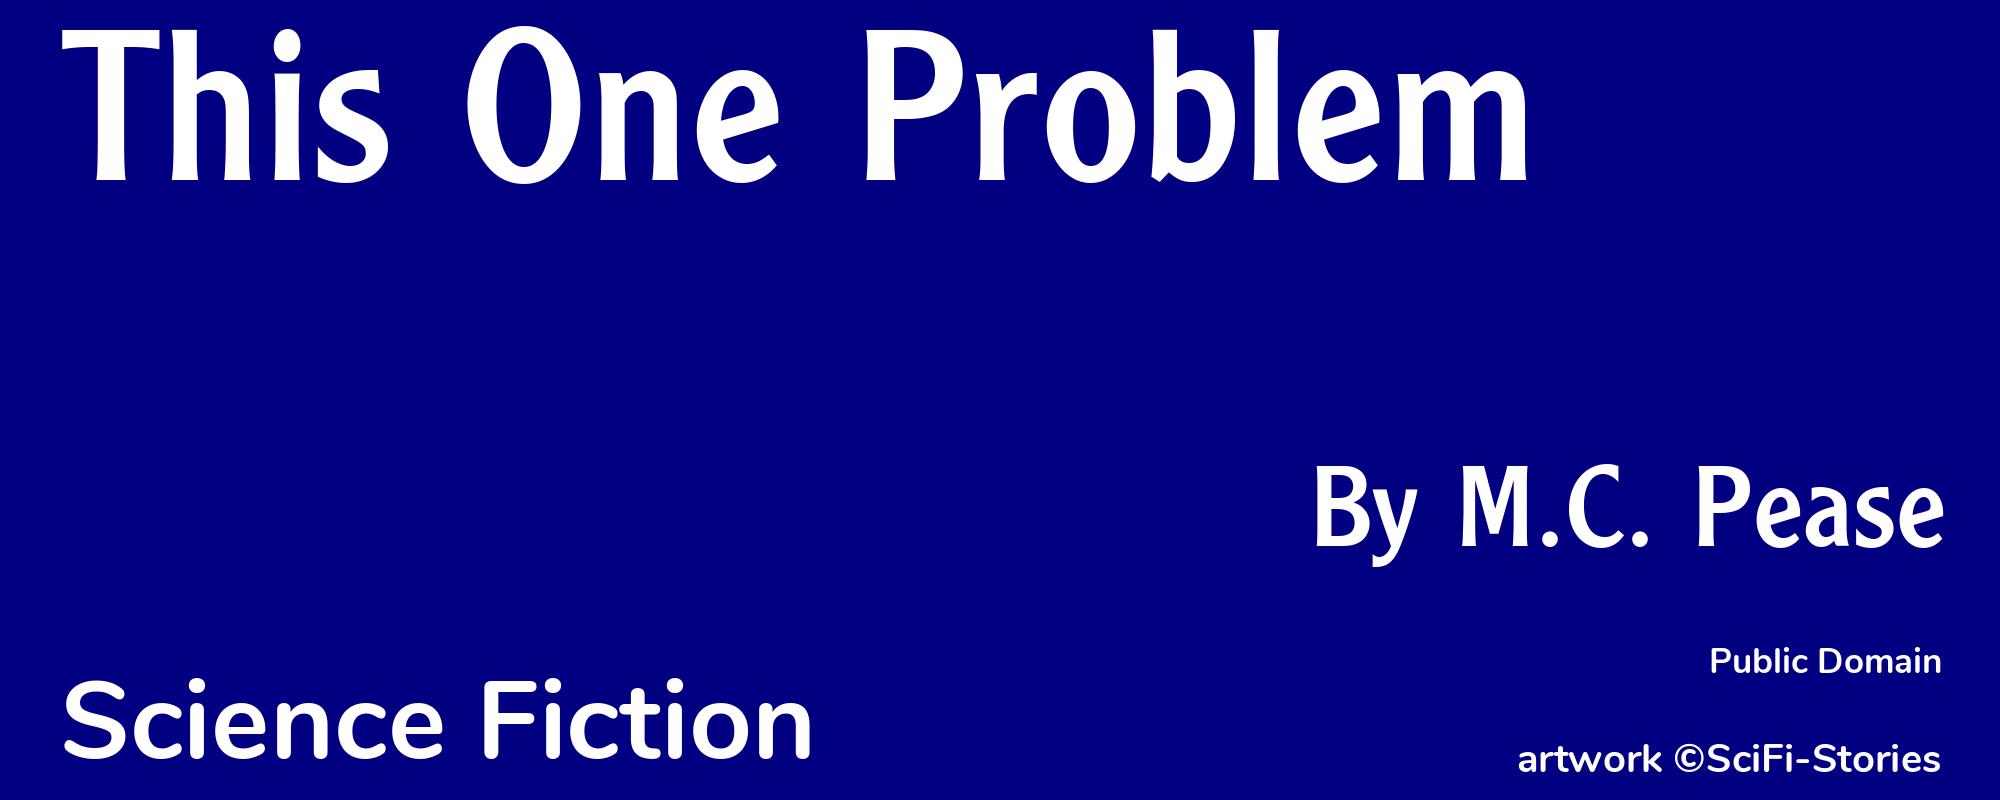 This One Problem - Cover